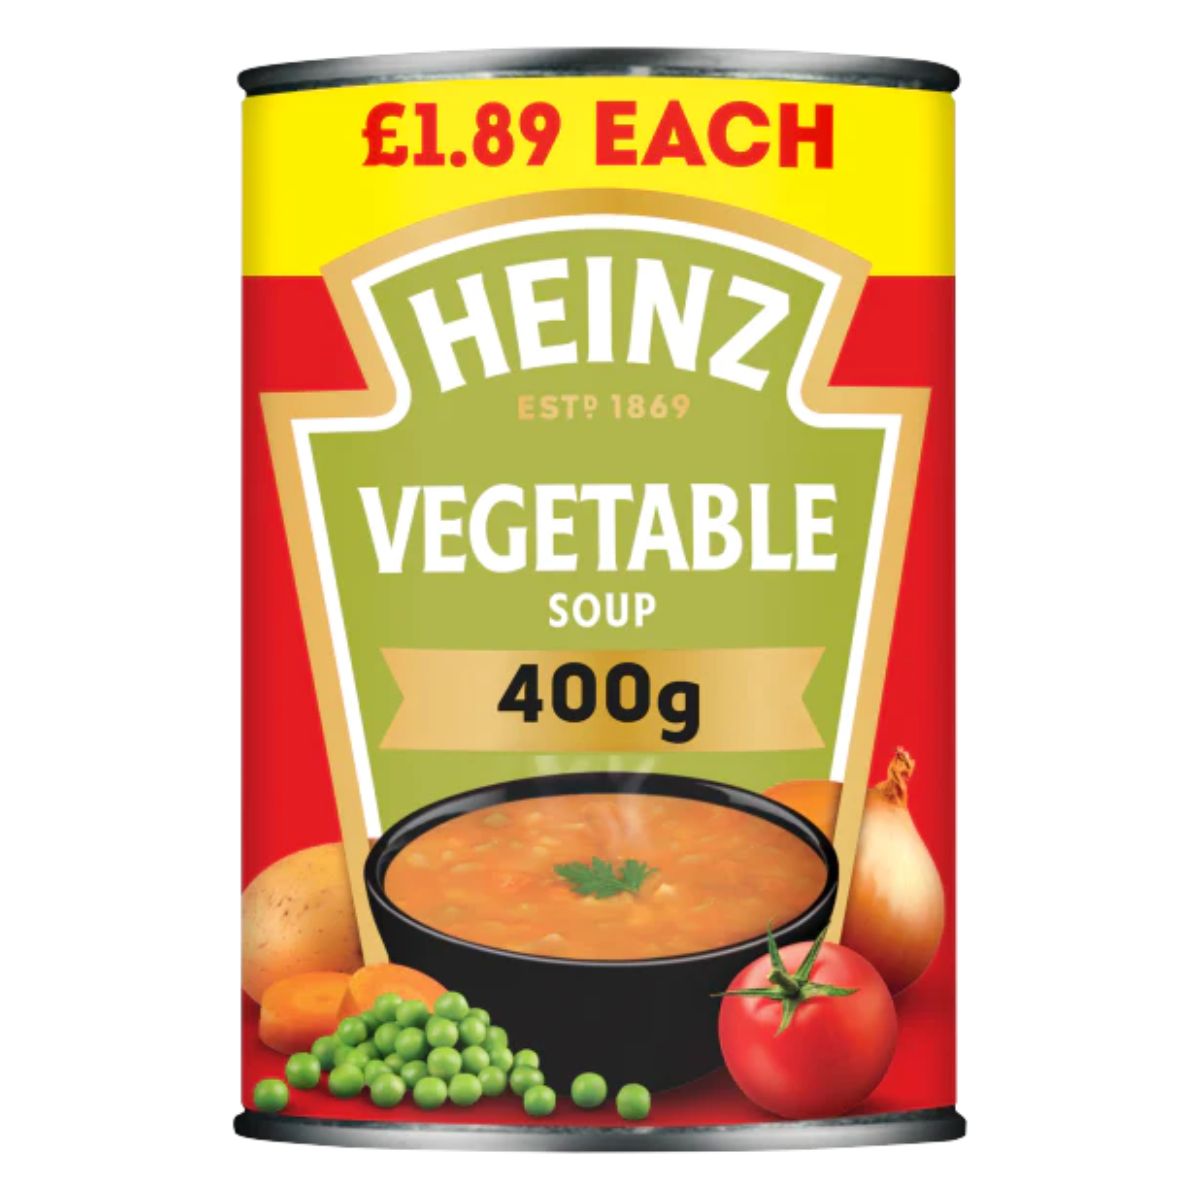 A can of Heinz - Vegetable Soup - 400g, priced at £1.89 each.